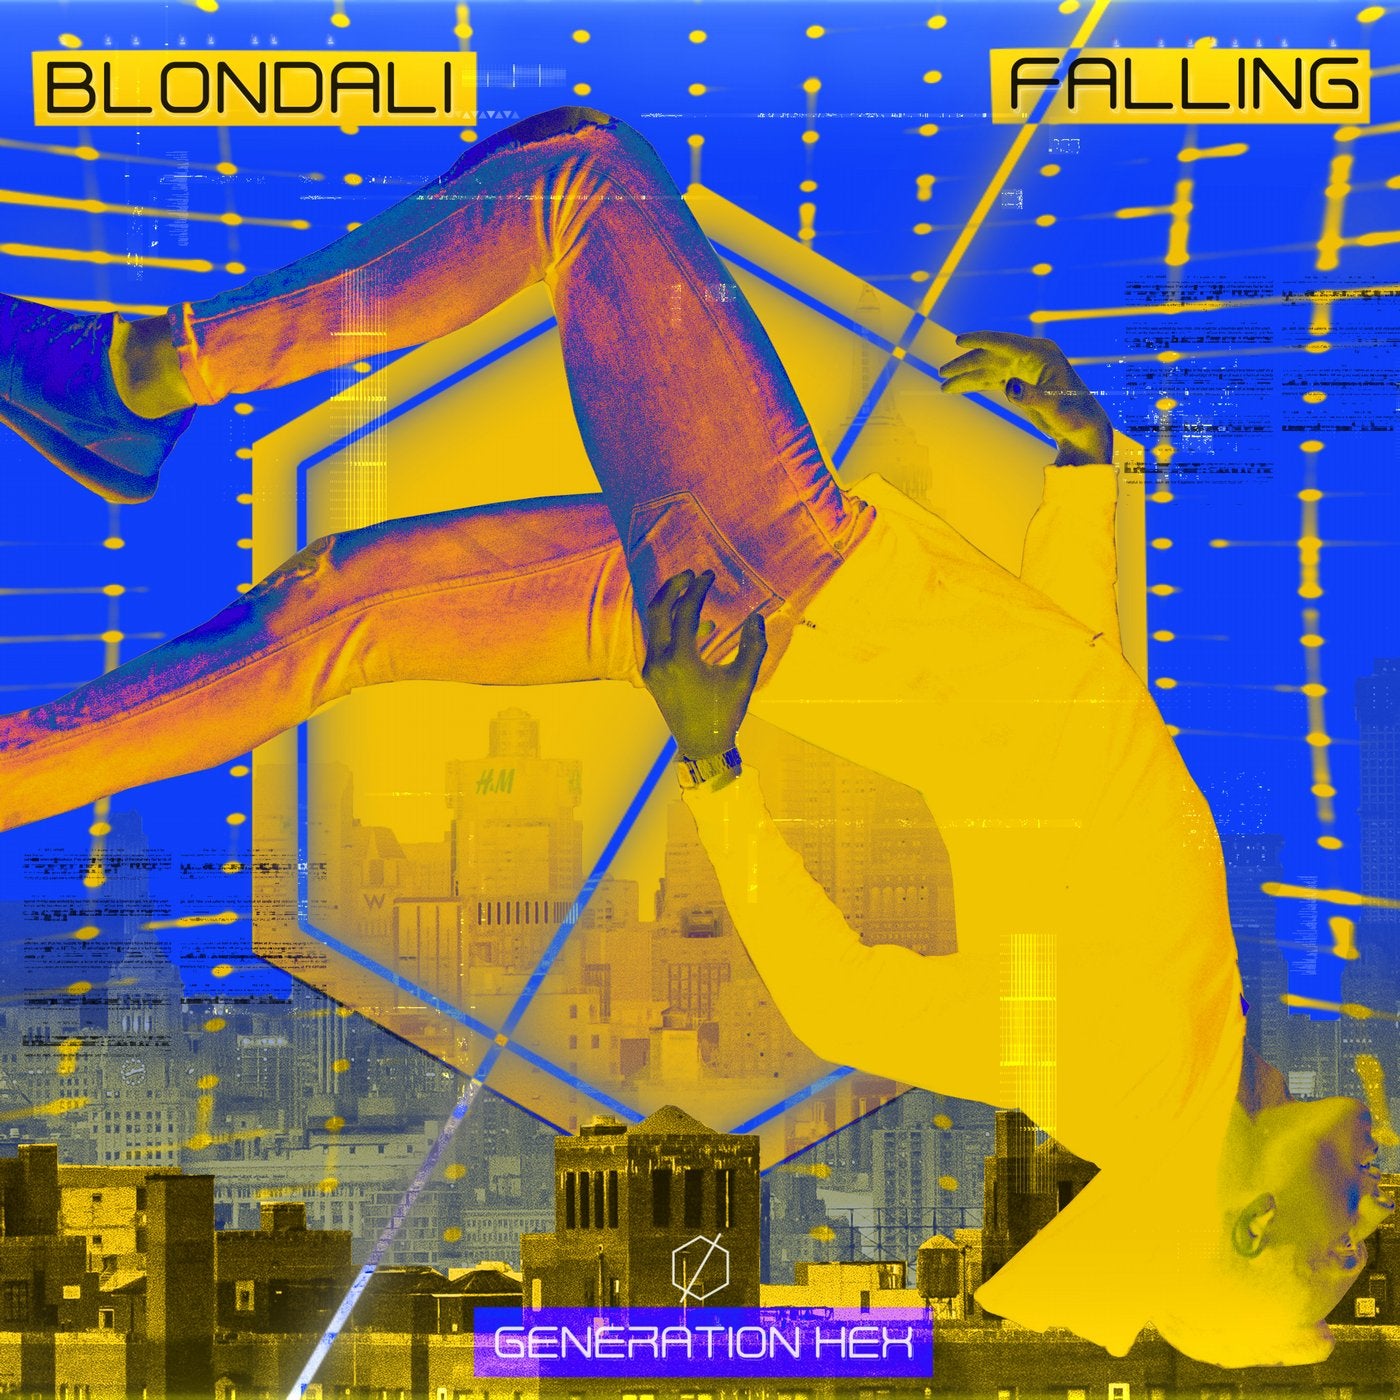 Falling - Extended Mix